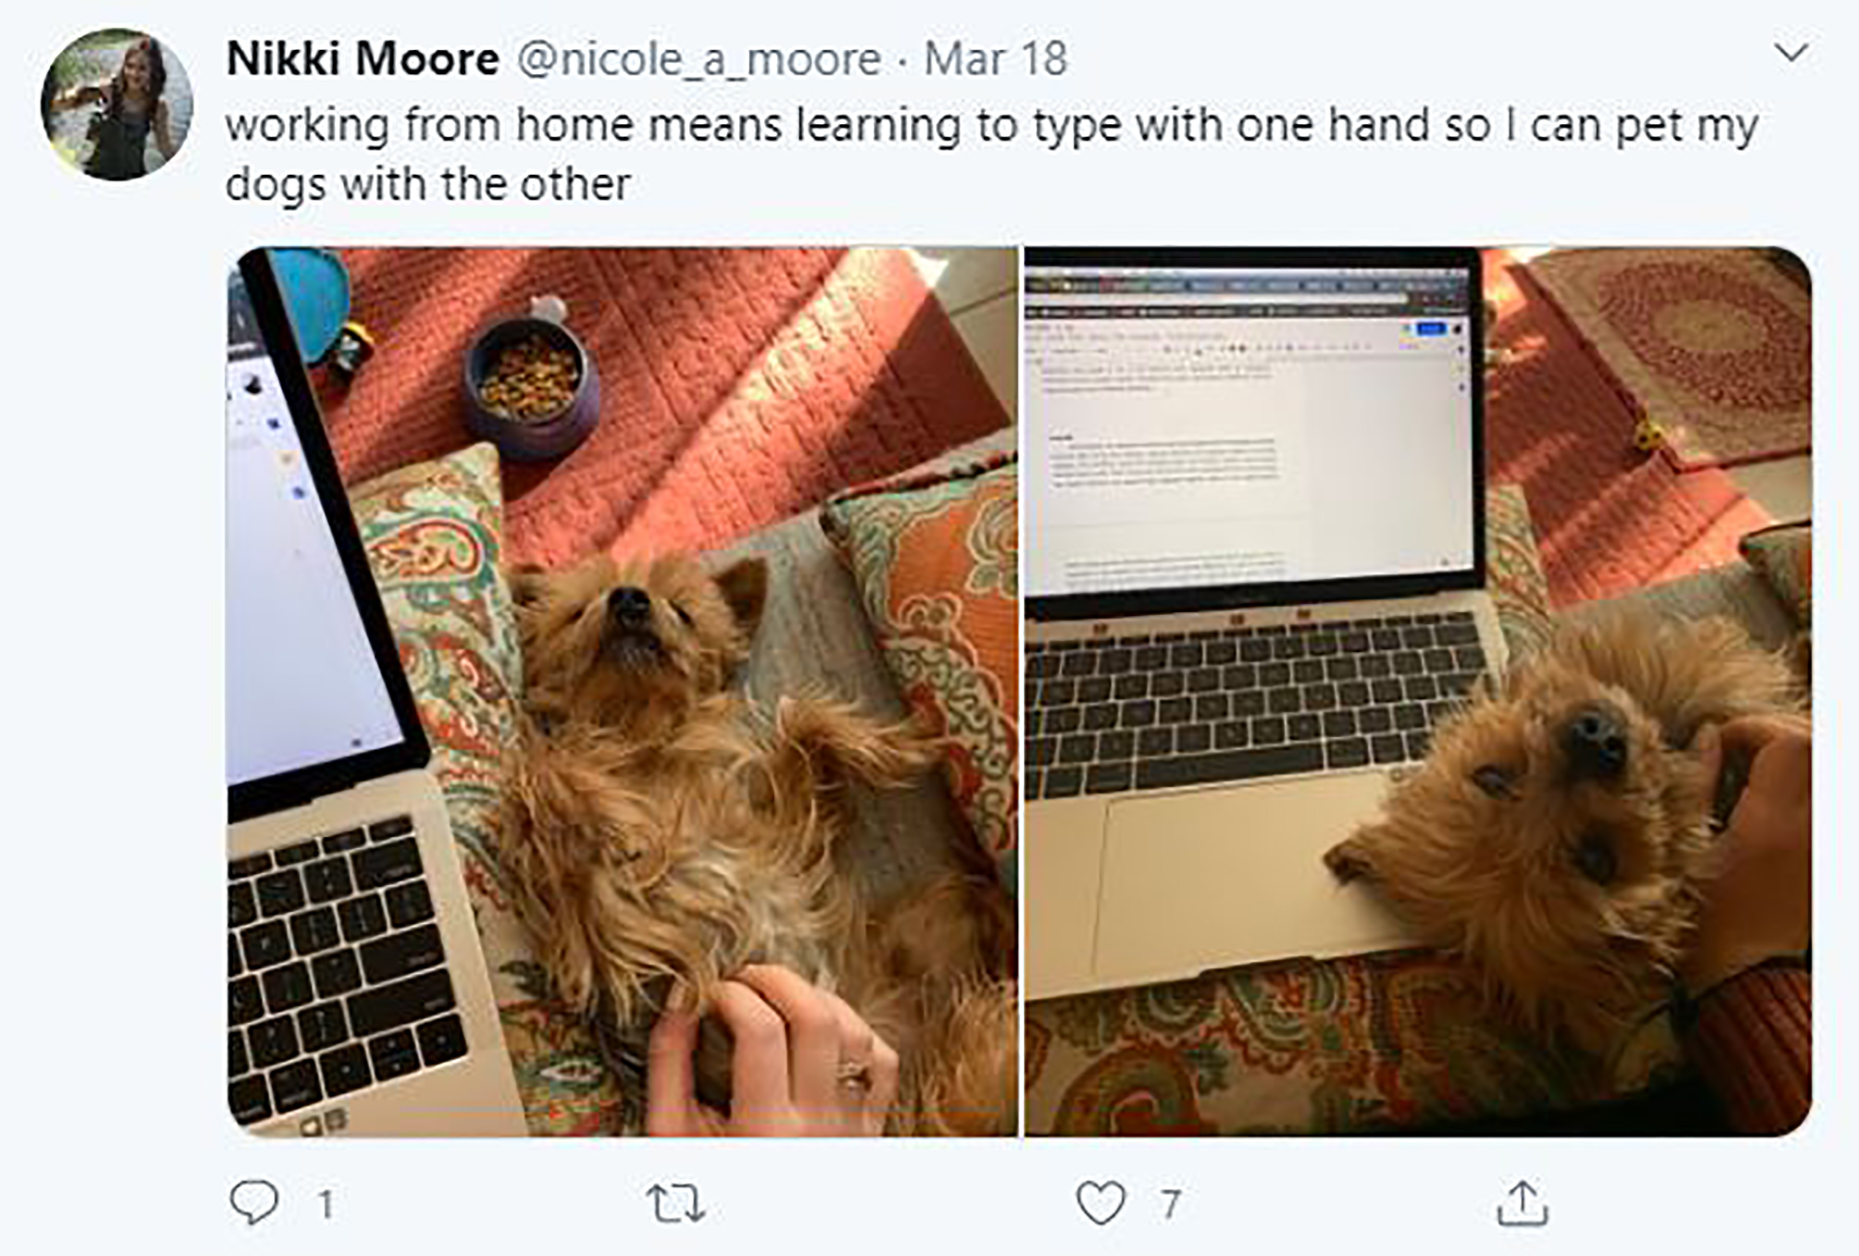 Working from home with dog, text says "Working from home means learning to type with one hand so I can pet my dogs with the other."